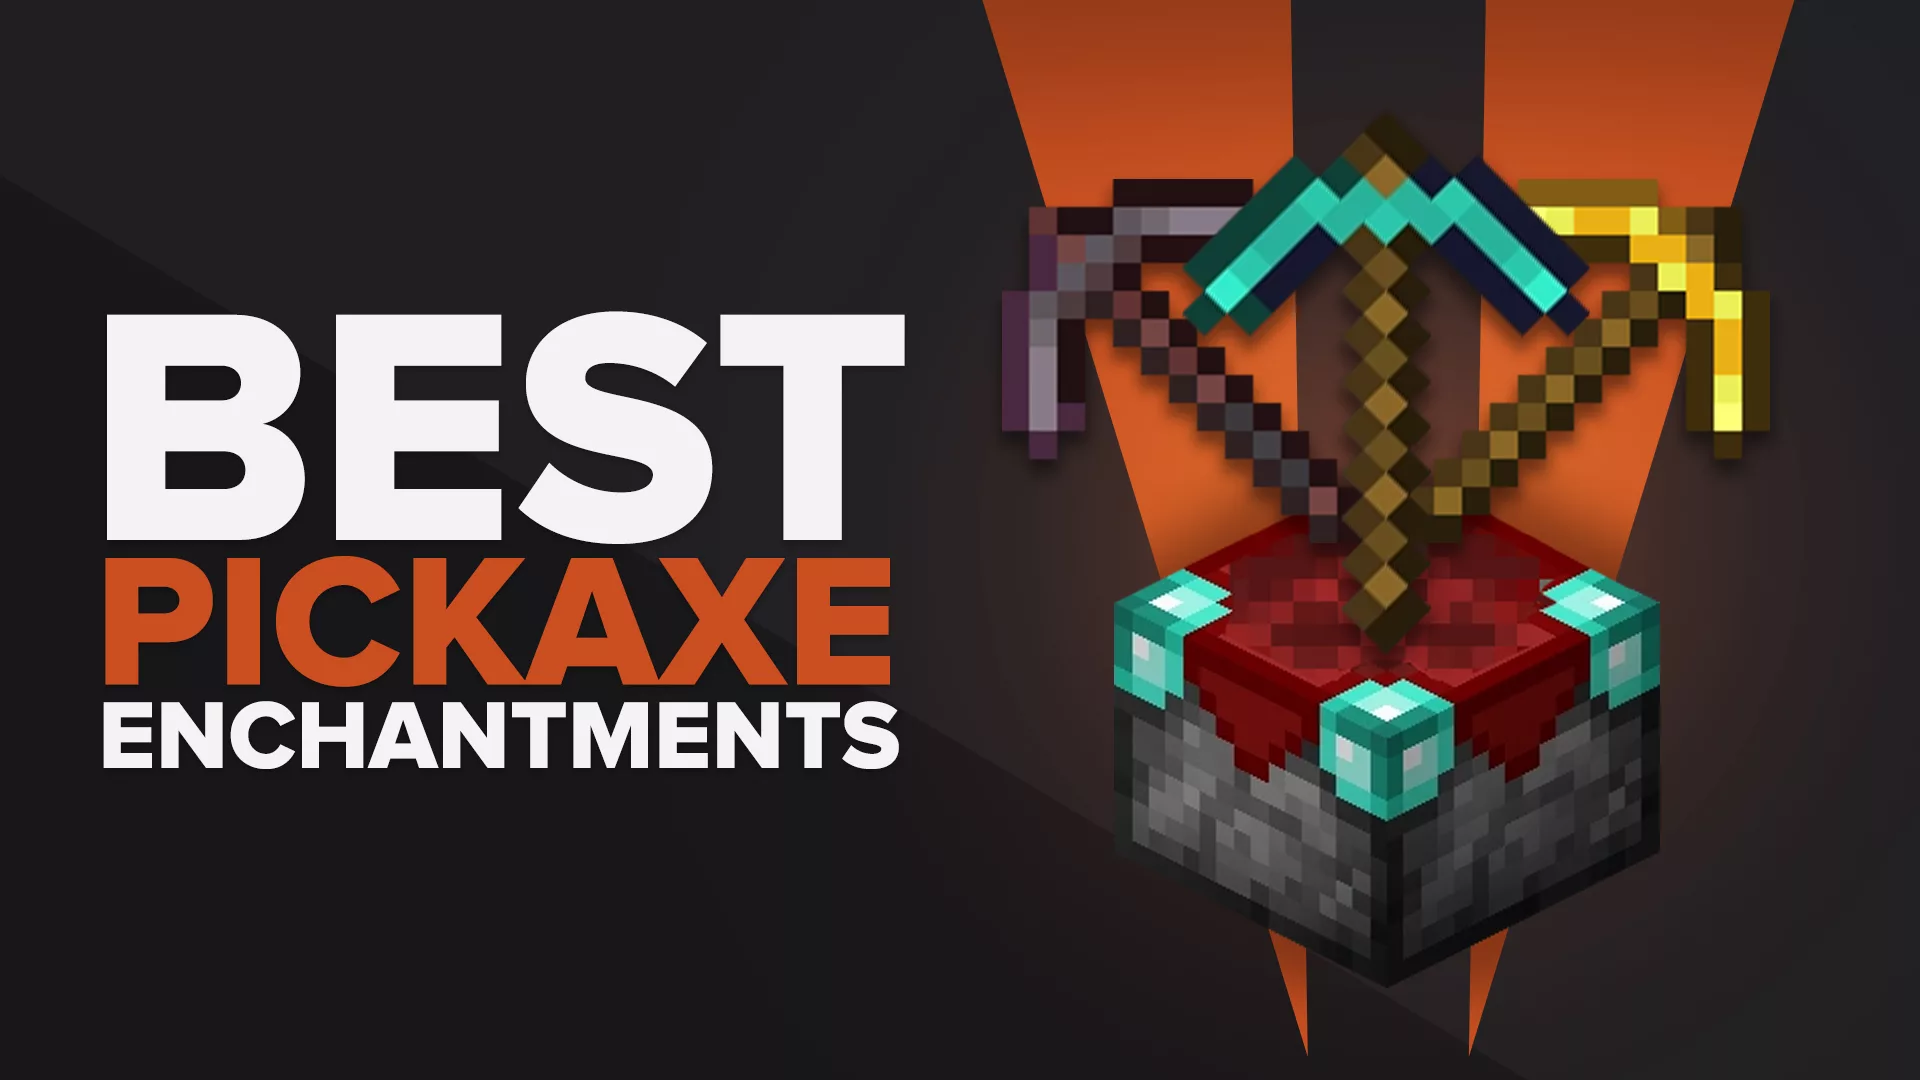 What Are The Best Pickaxe Enchantments In Minecraft